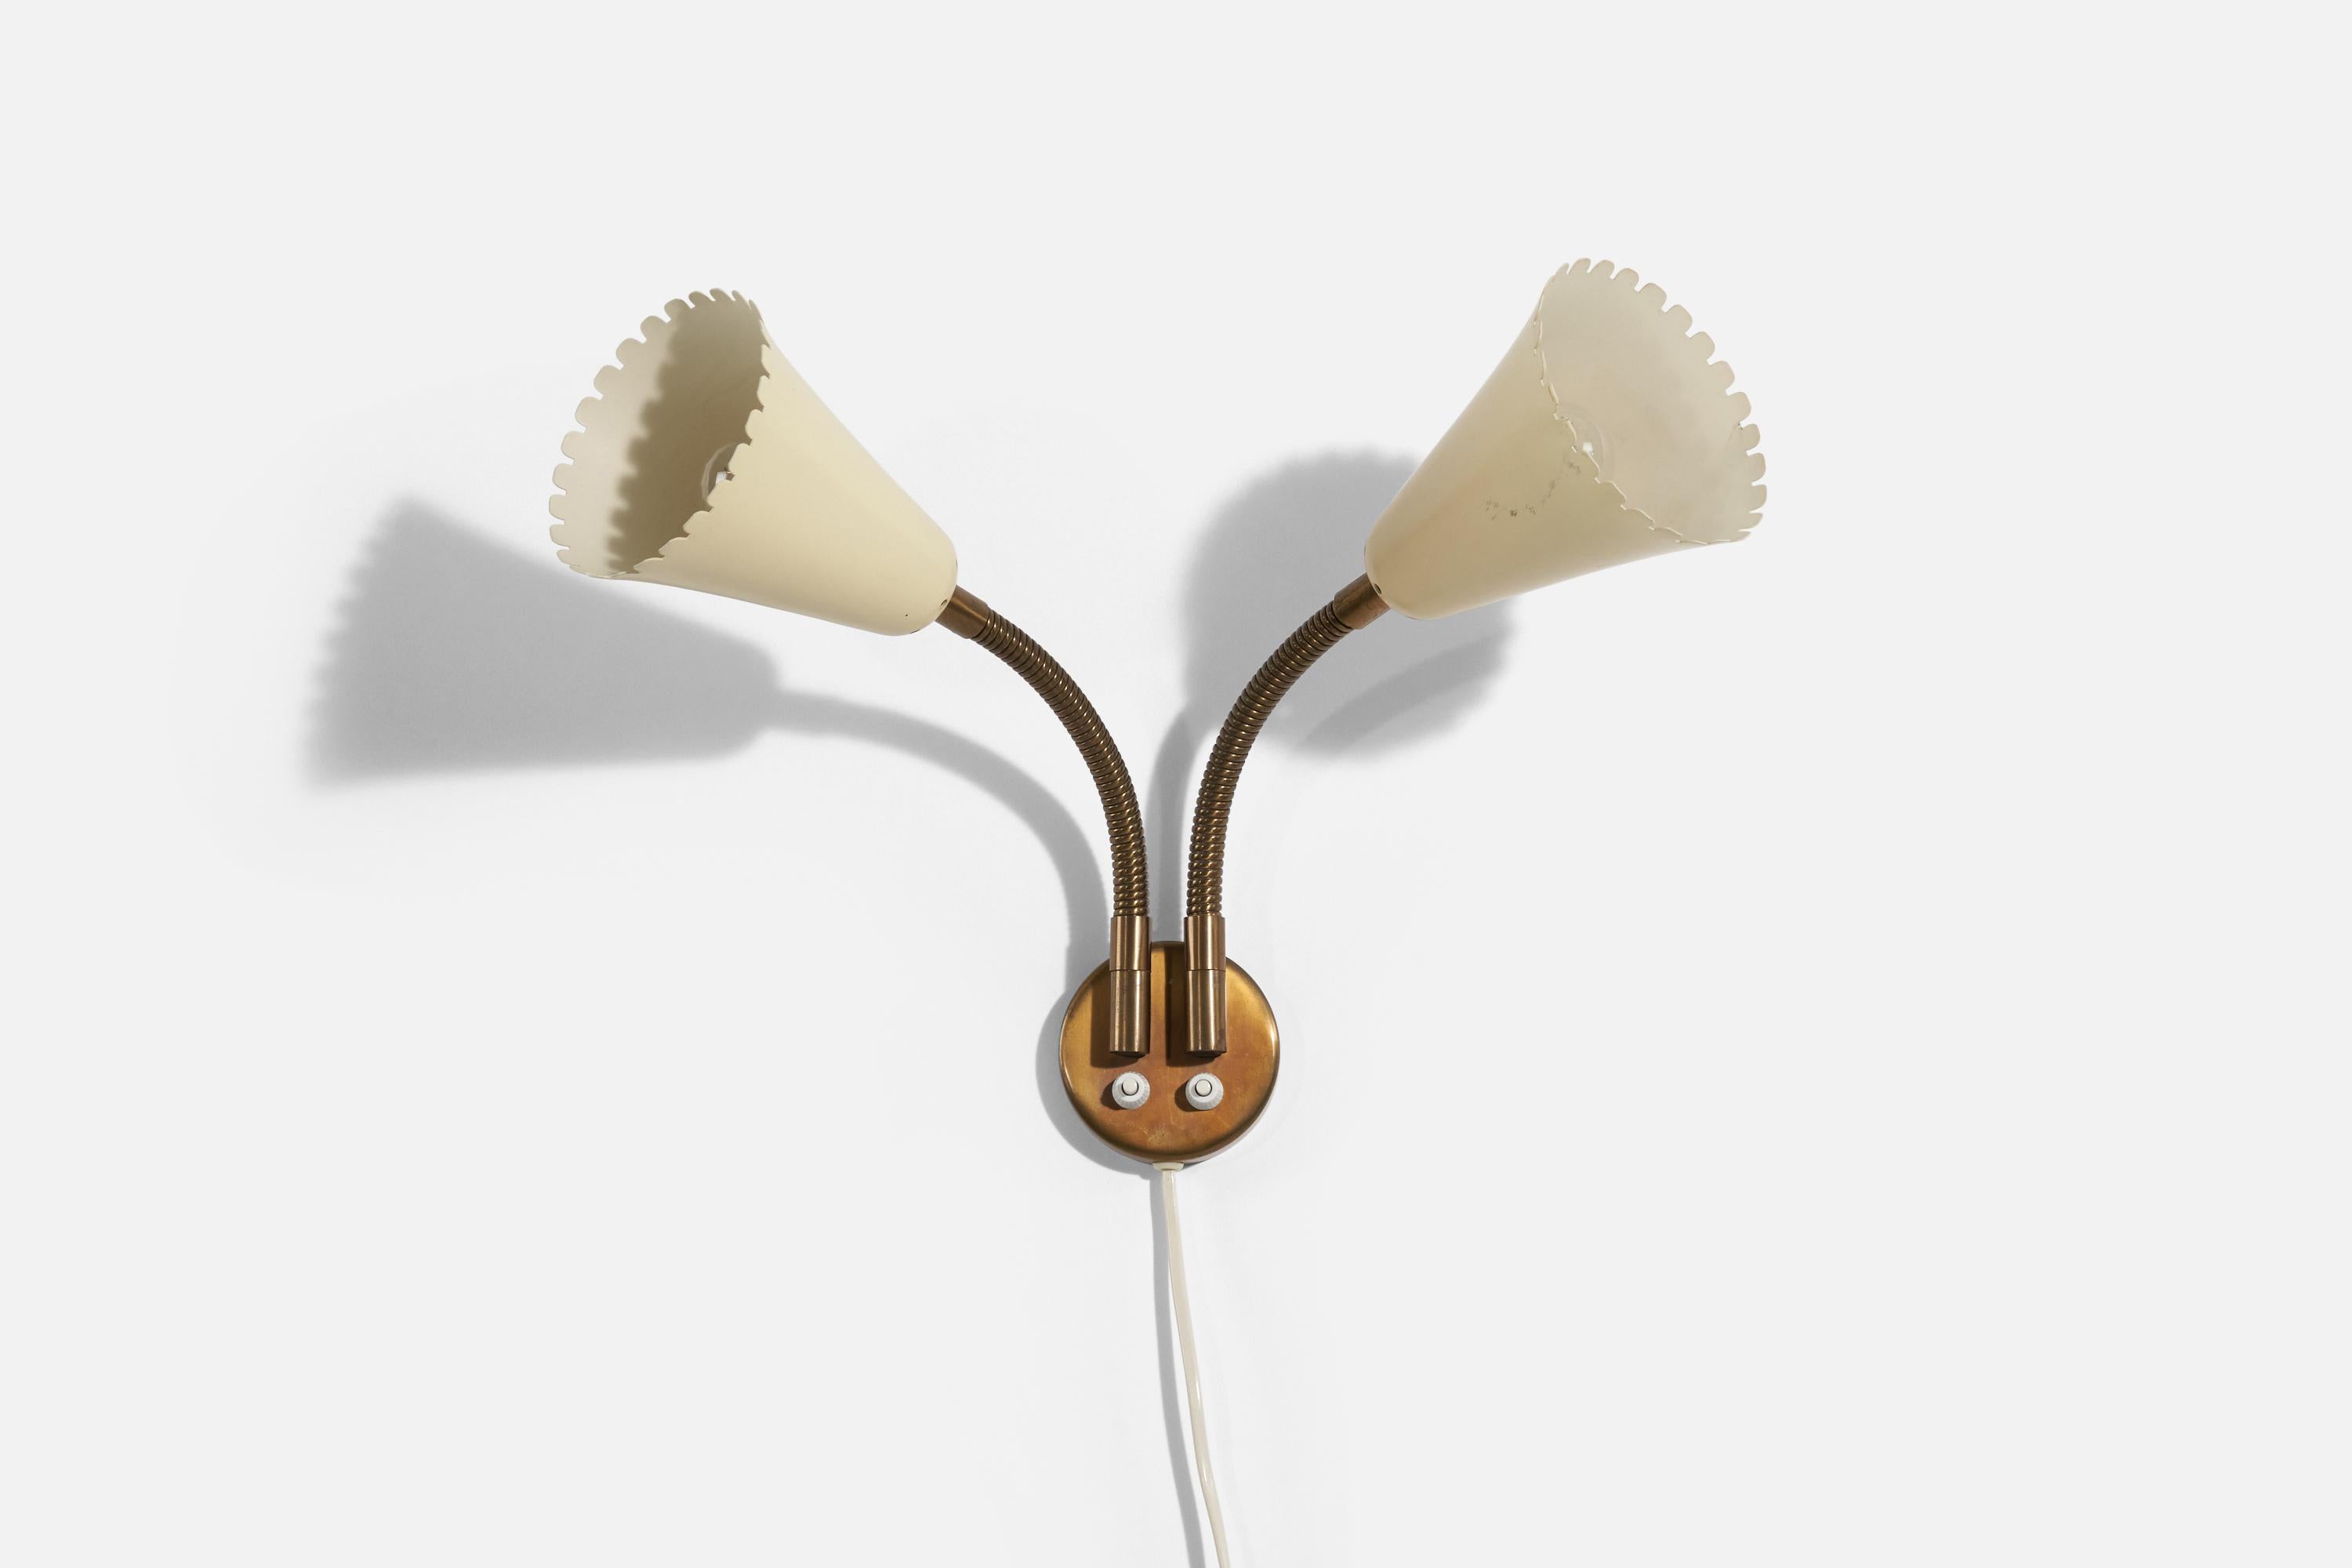 An adjustable organic wall light / sconce. Designed and produced by Böhlmarks, Sweden, 1950s. In brass and metal. Markings indicate patented design. 

